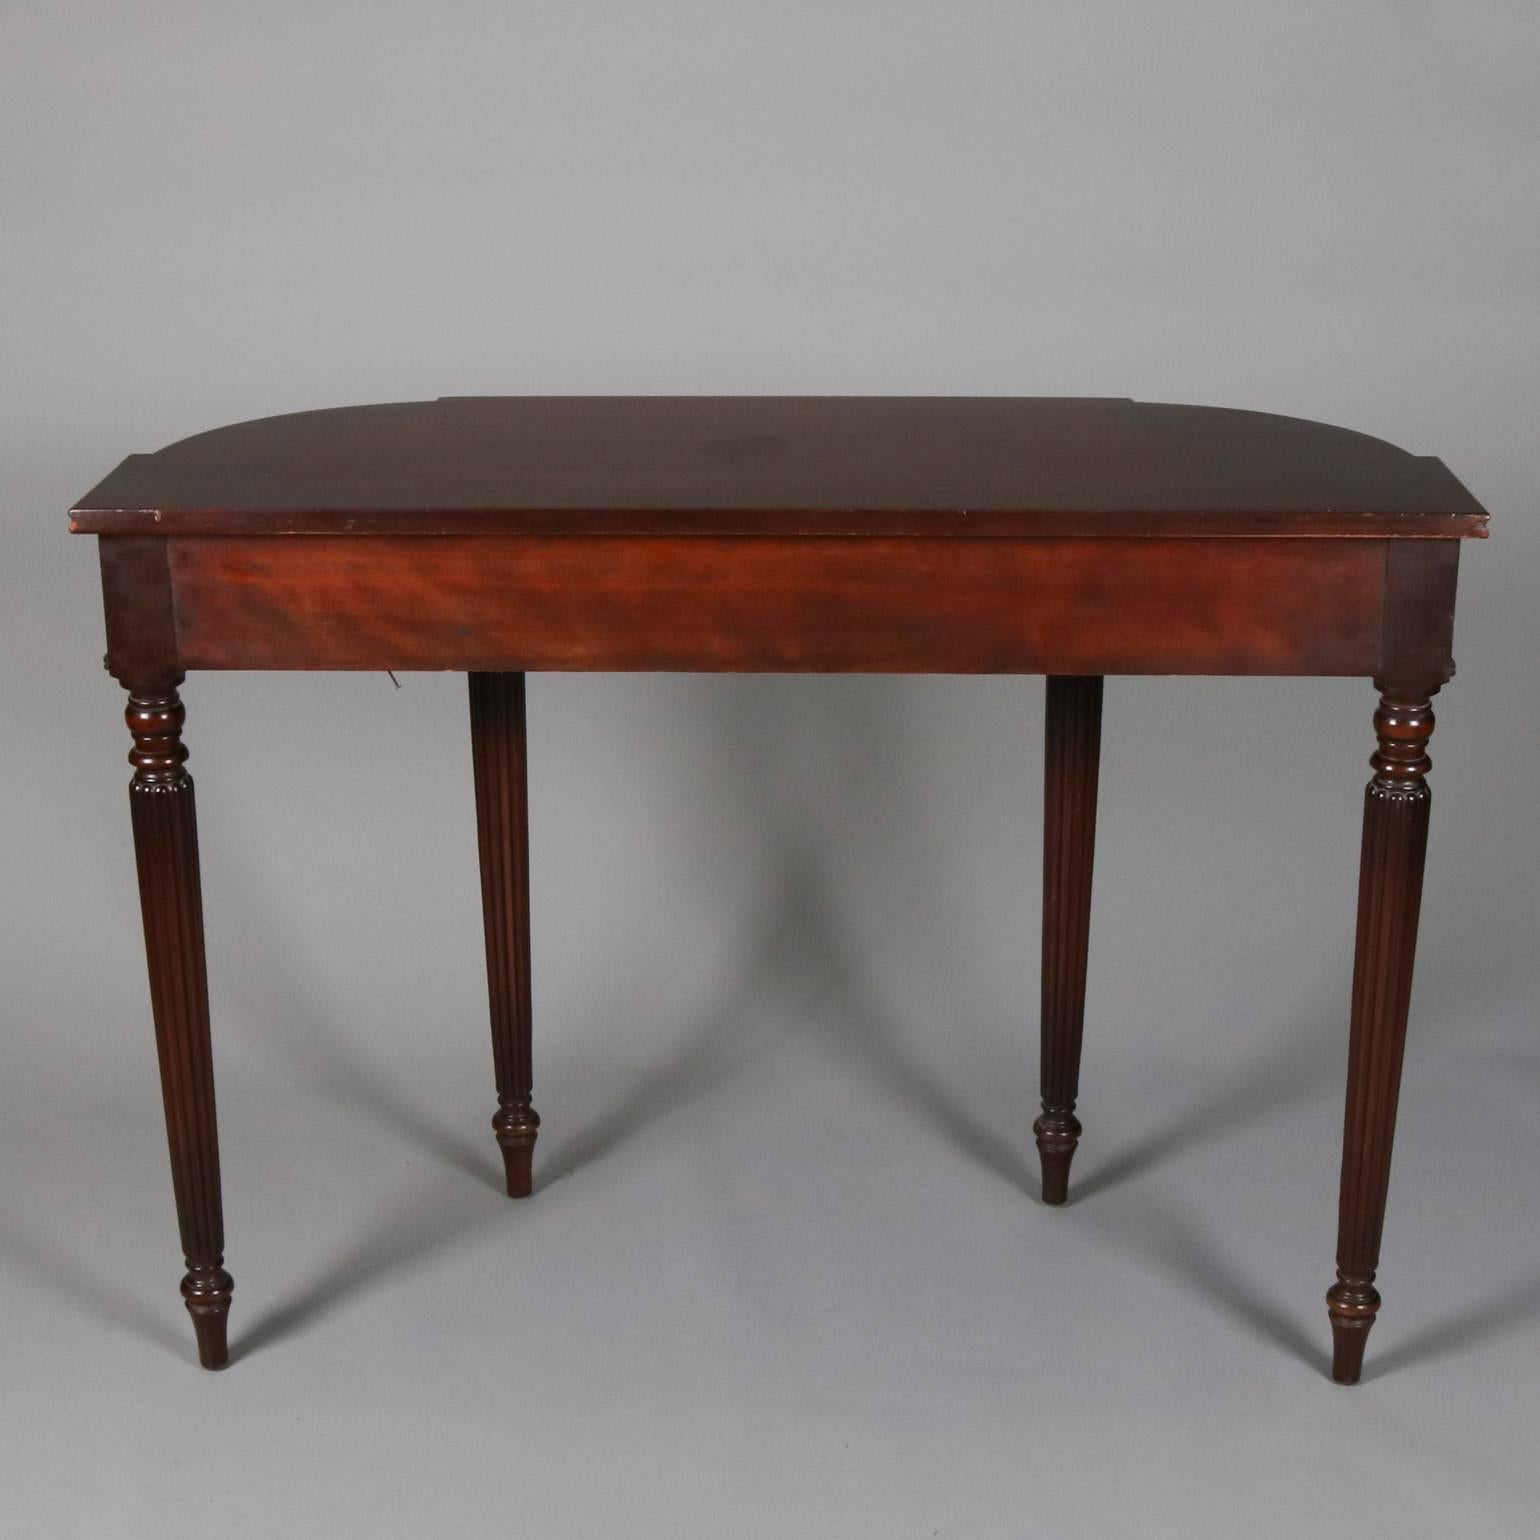 American Carved Mahogany Console Table with Mirror by Elgin Simonds Co., circa 1900